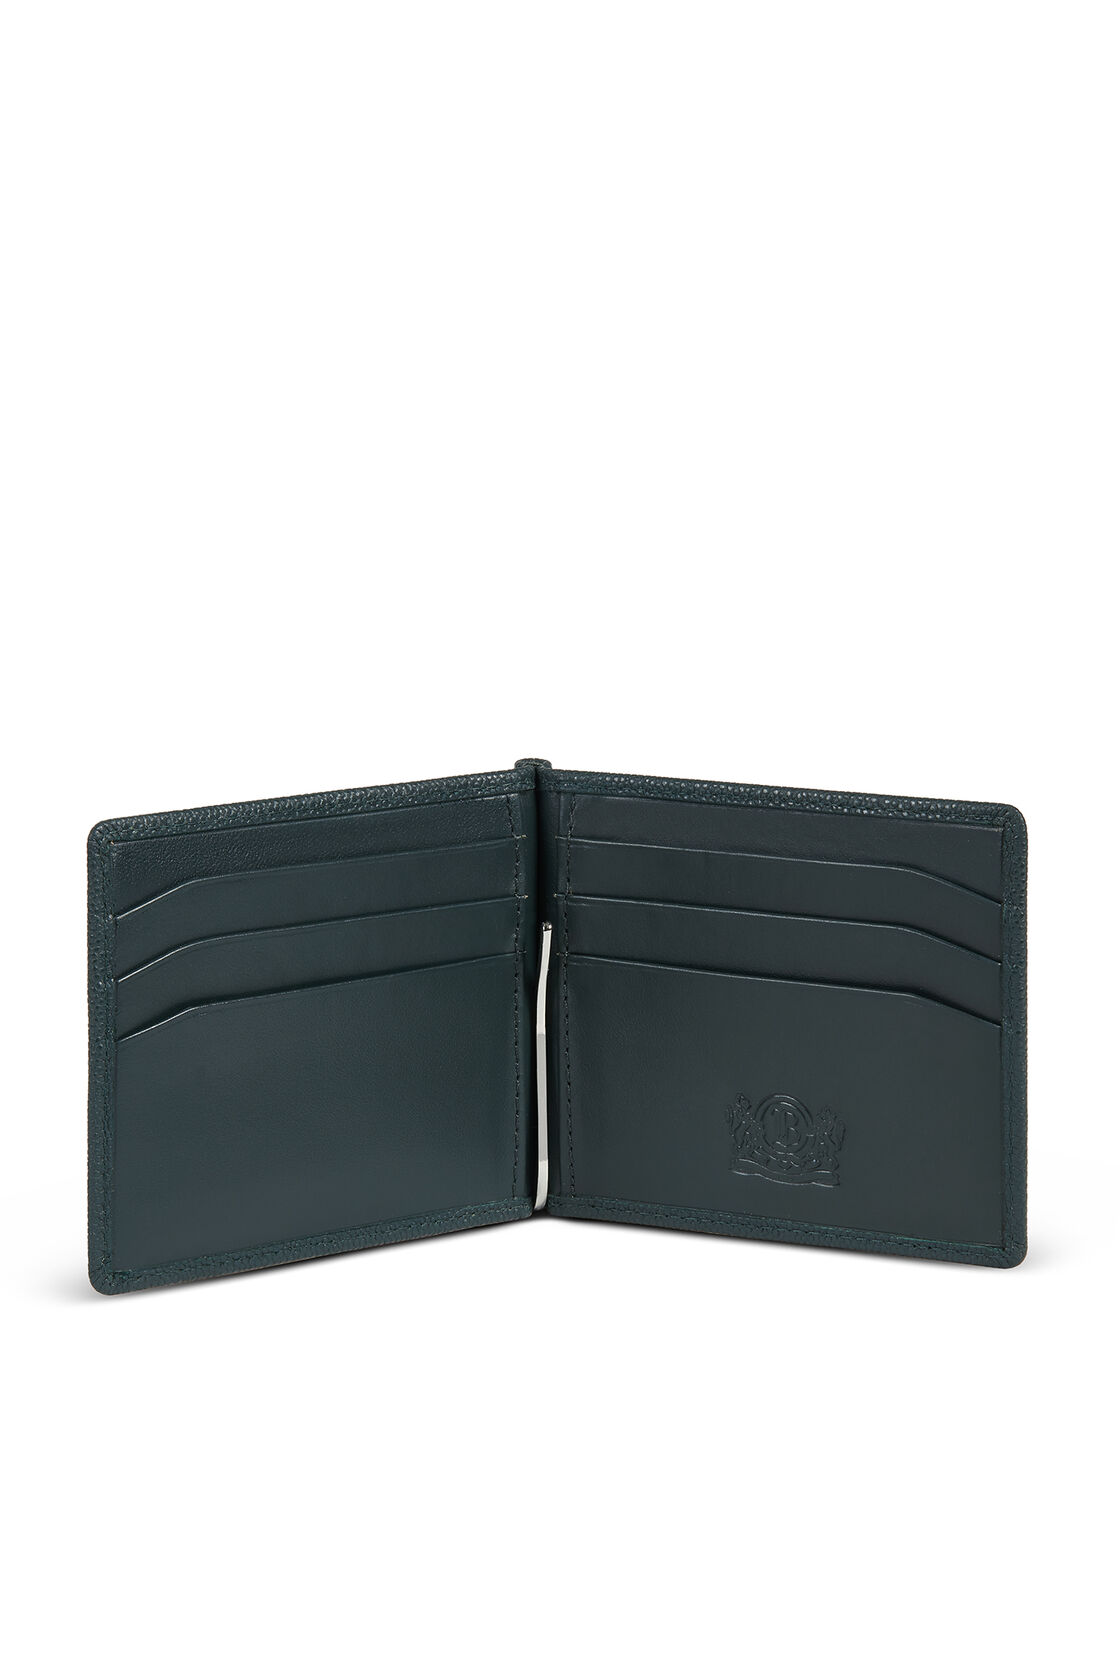 8 SLOT CAVIAR LEATHER WALLET WITH CLIP | Boggi